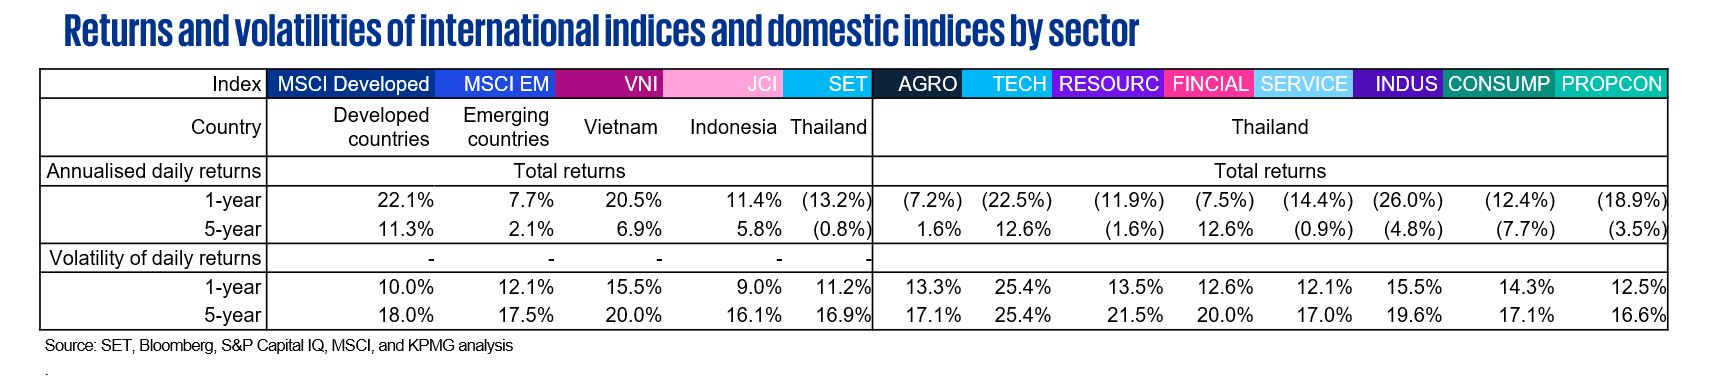 Returns and volatilities of international indices and domestic indices by sector